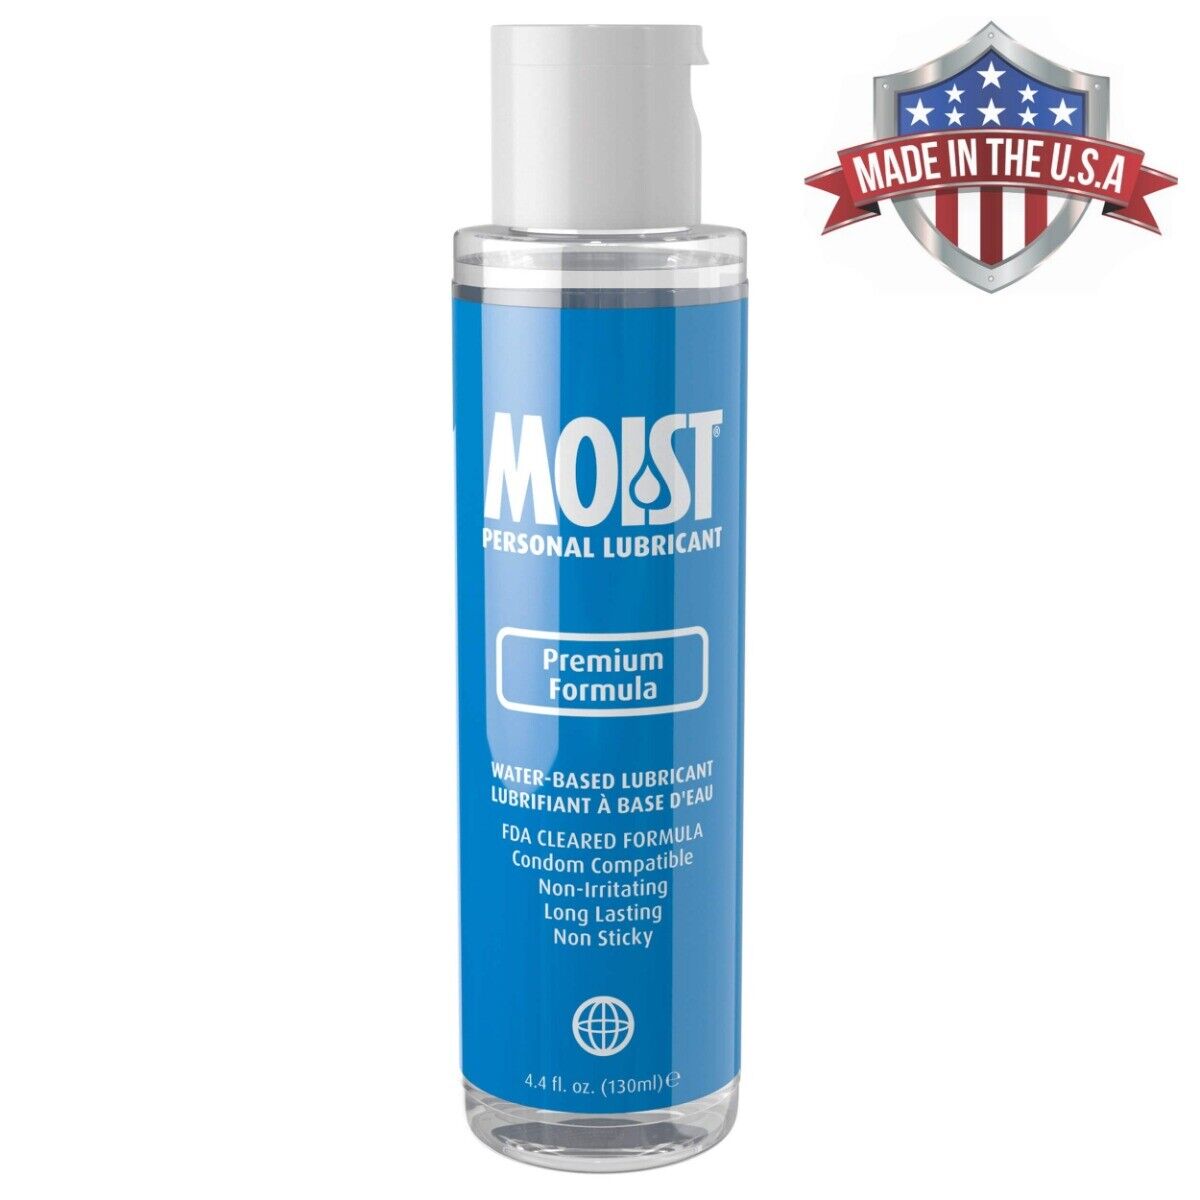 Moist Water based Personal Lubricant Premium Formula Made in USA 4.4 oz